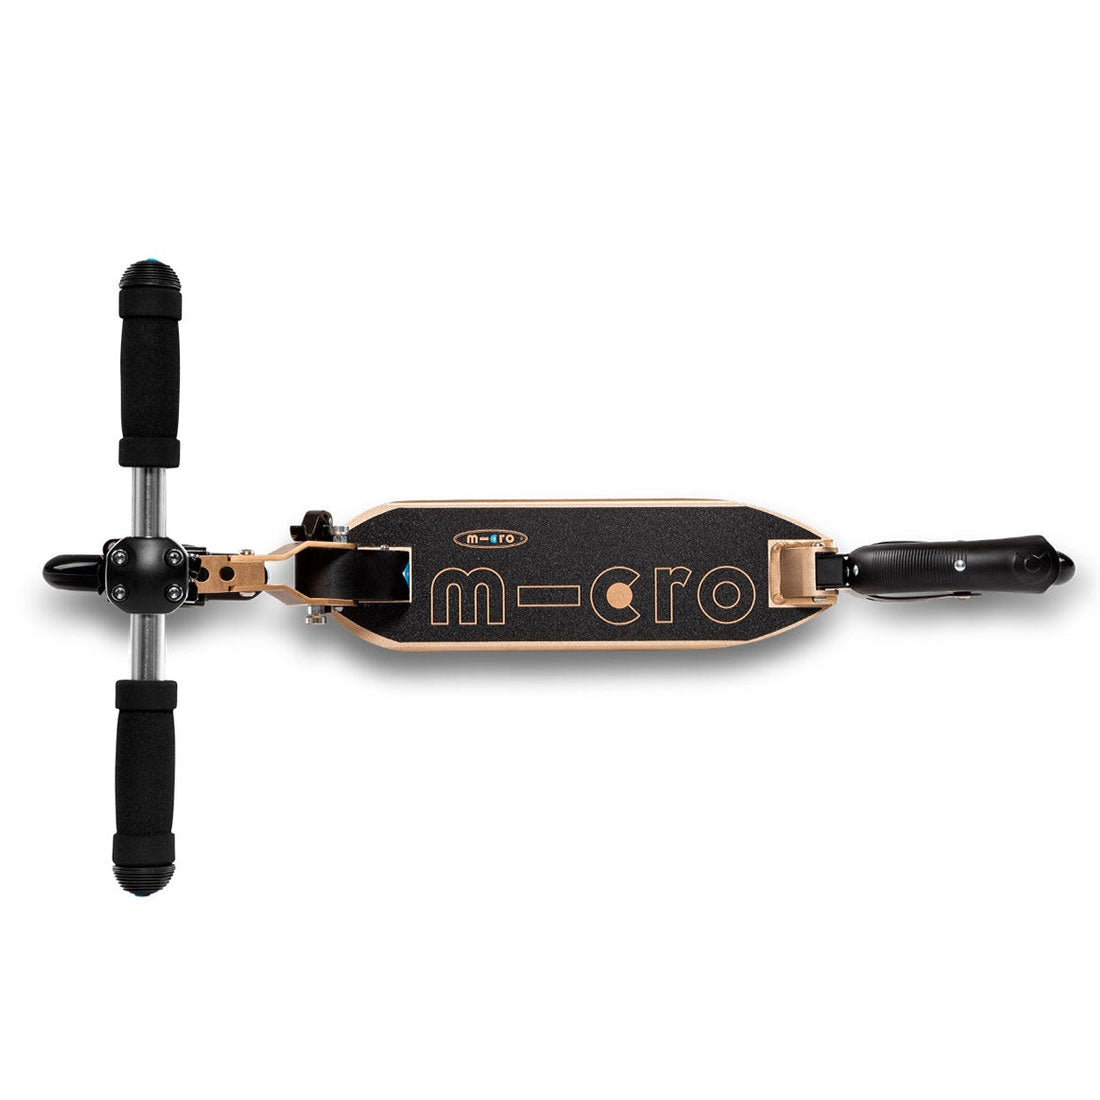 Micro Suspension Scooter - Bronze Scooter Completes Rec